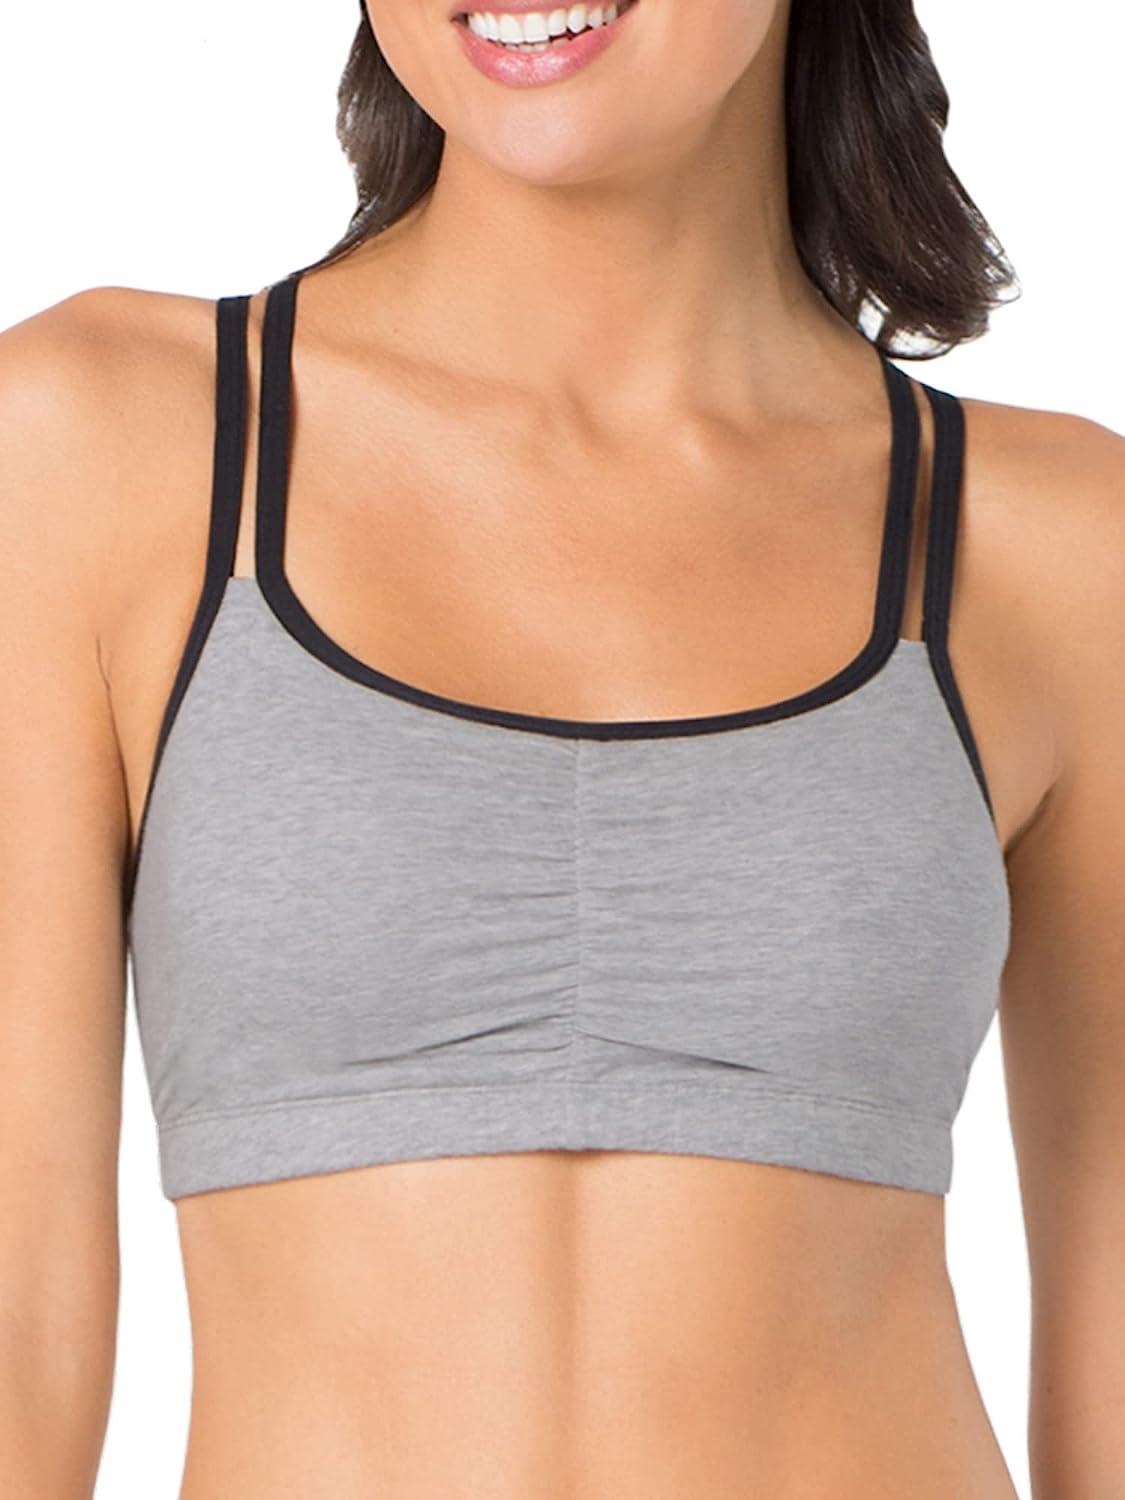 Fruit of the Loom Women's Adjustable Shirred Front Racerback Sports Bra 3  Grey With Black/White/Black Hue 38